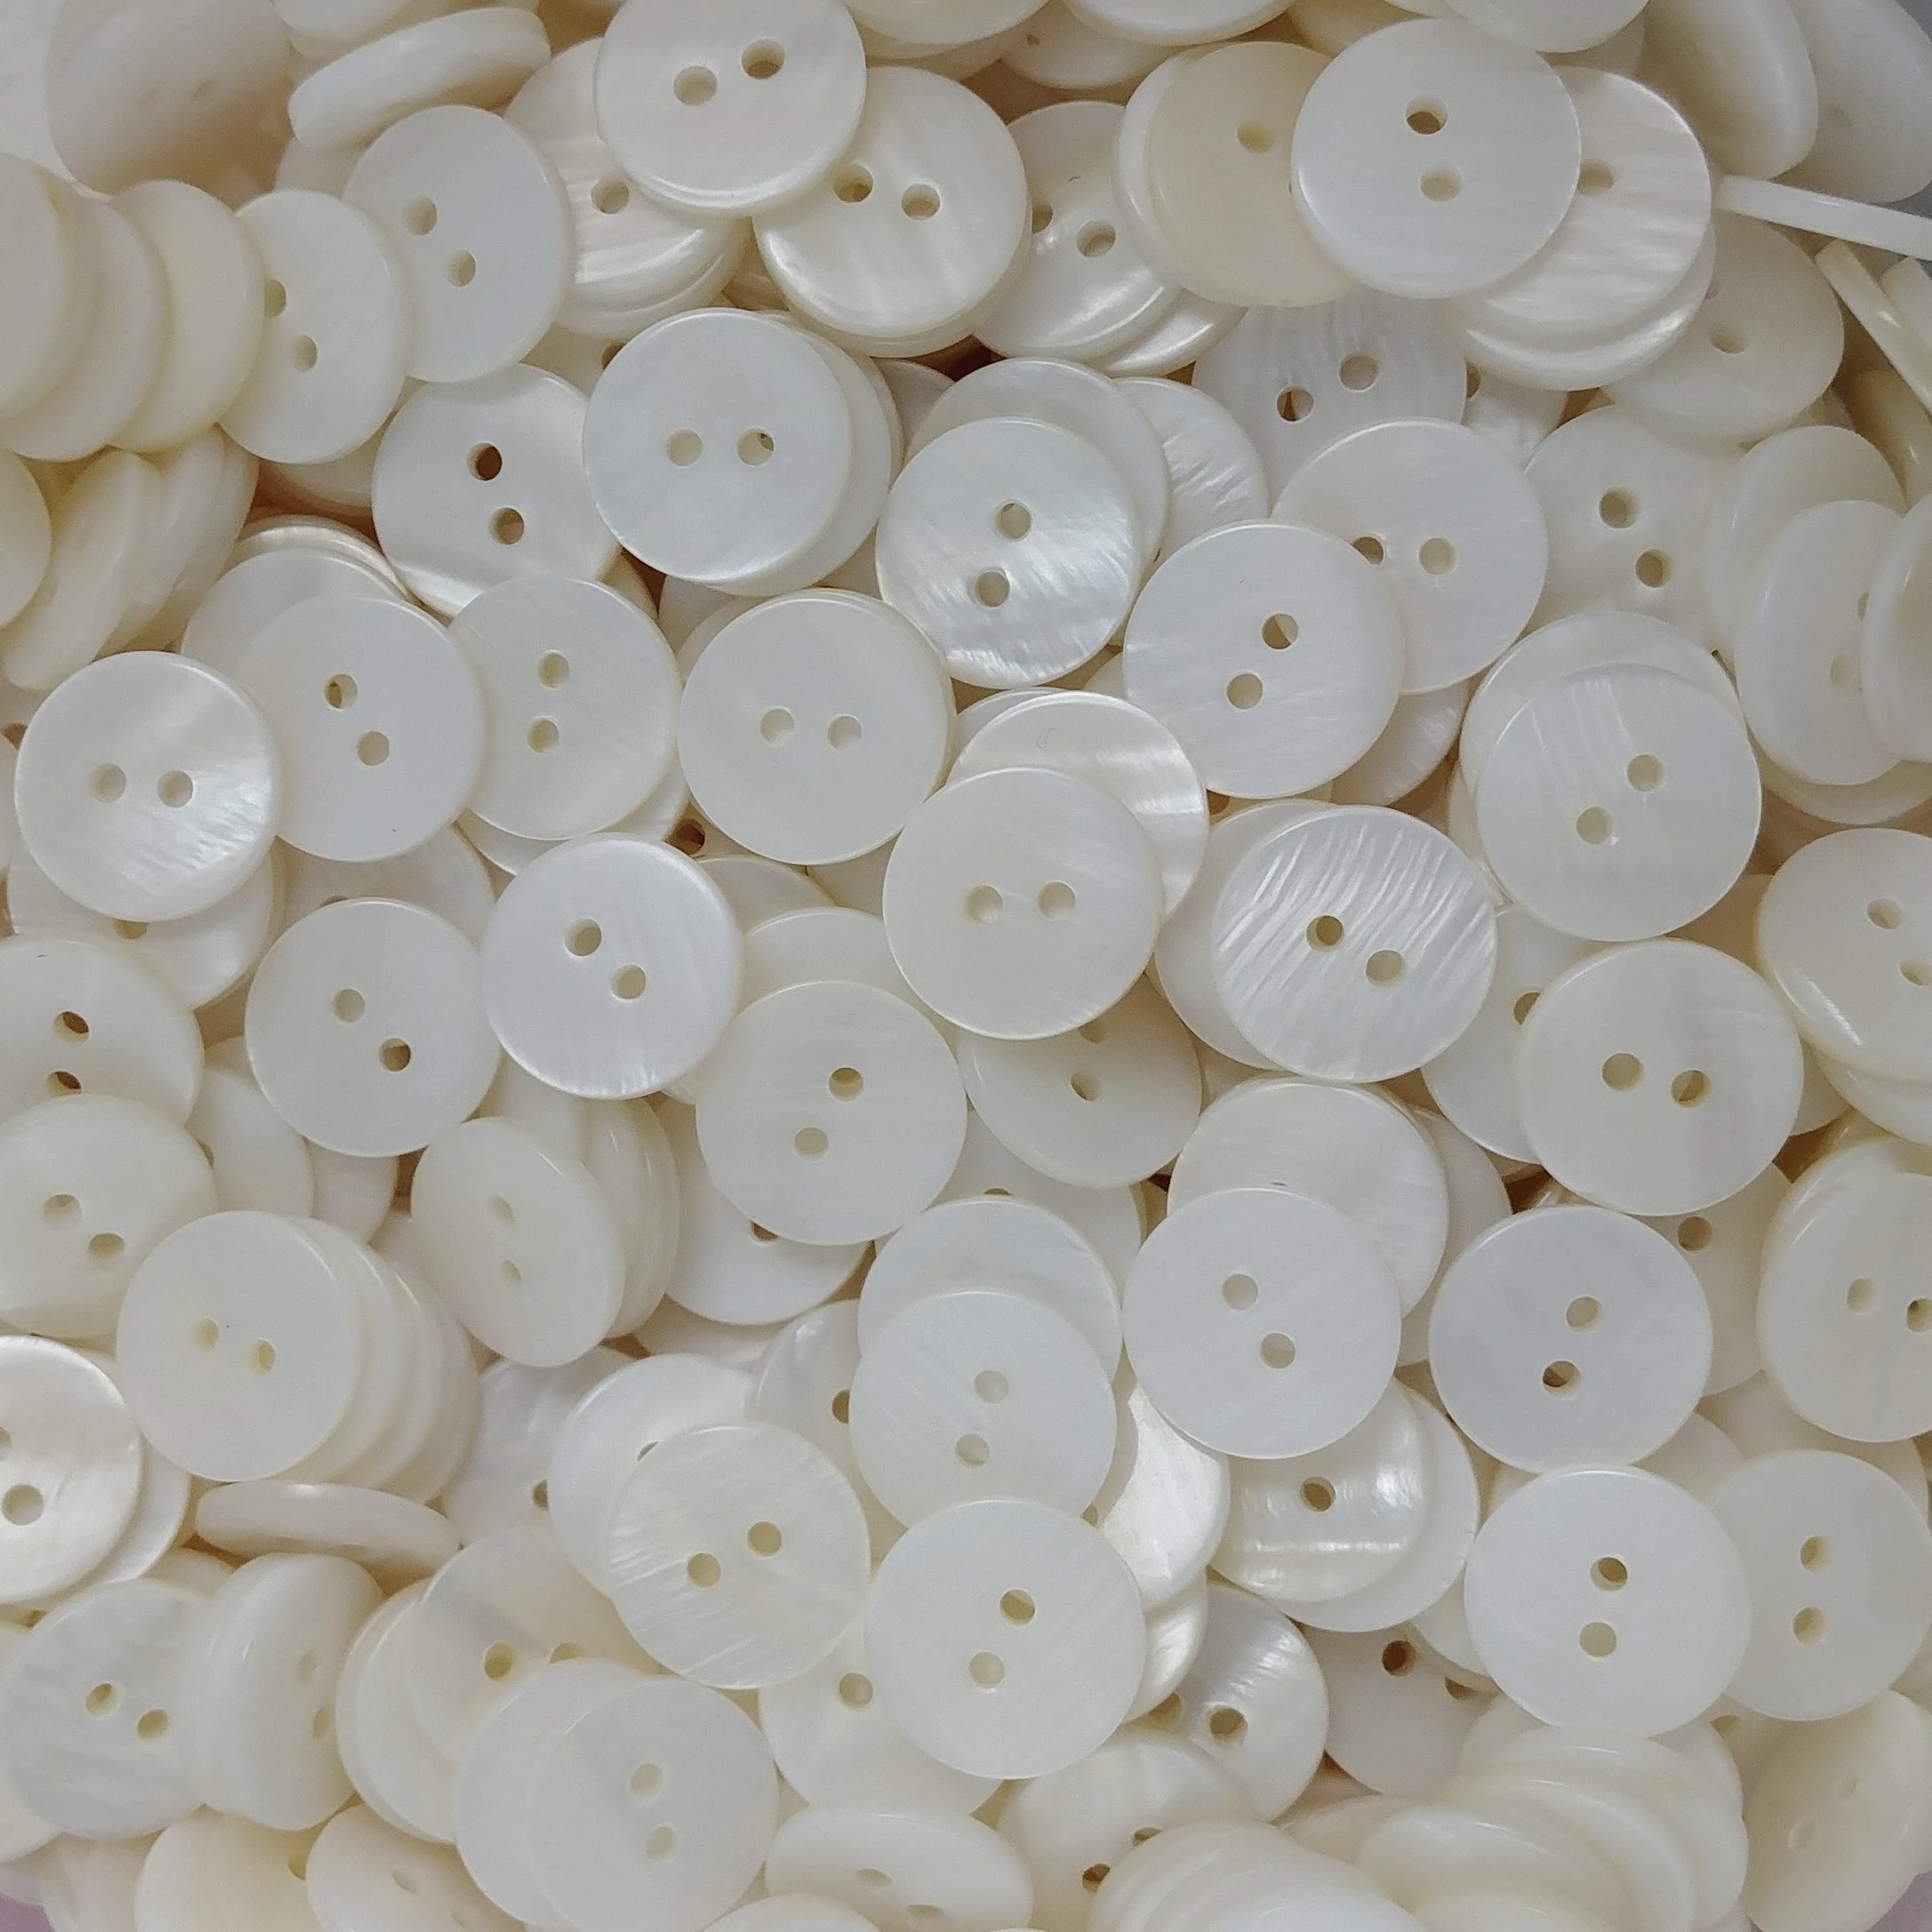 Mother of pearl button 15mm - set of 6 eco friendly natural buttons